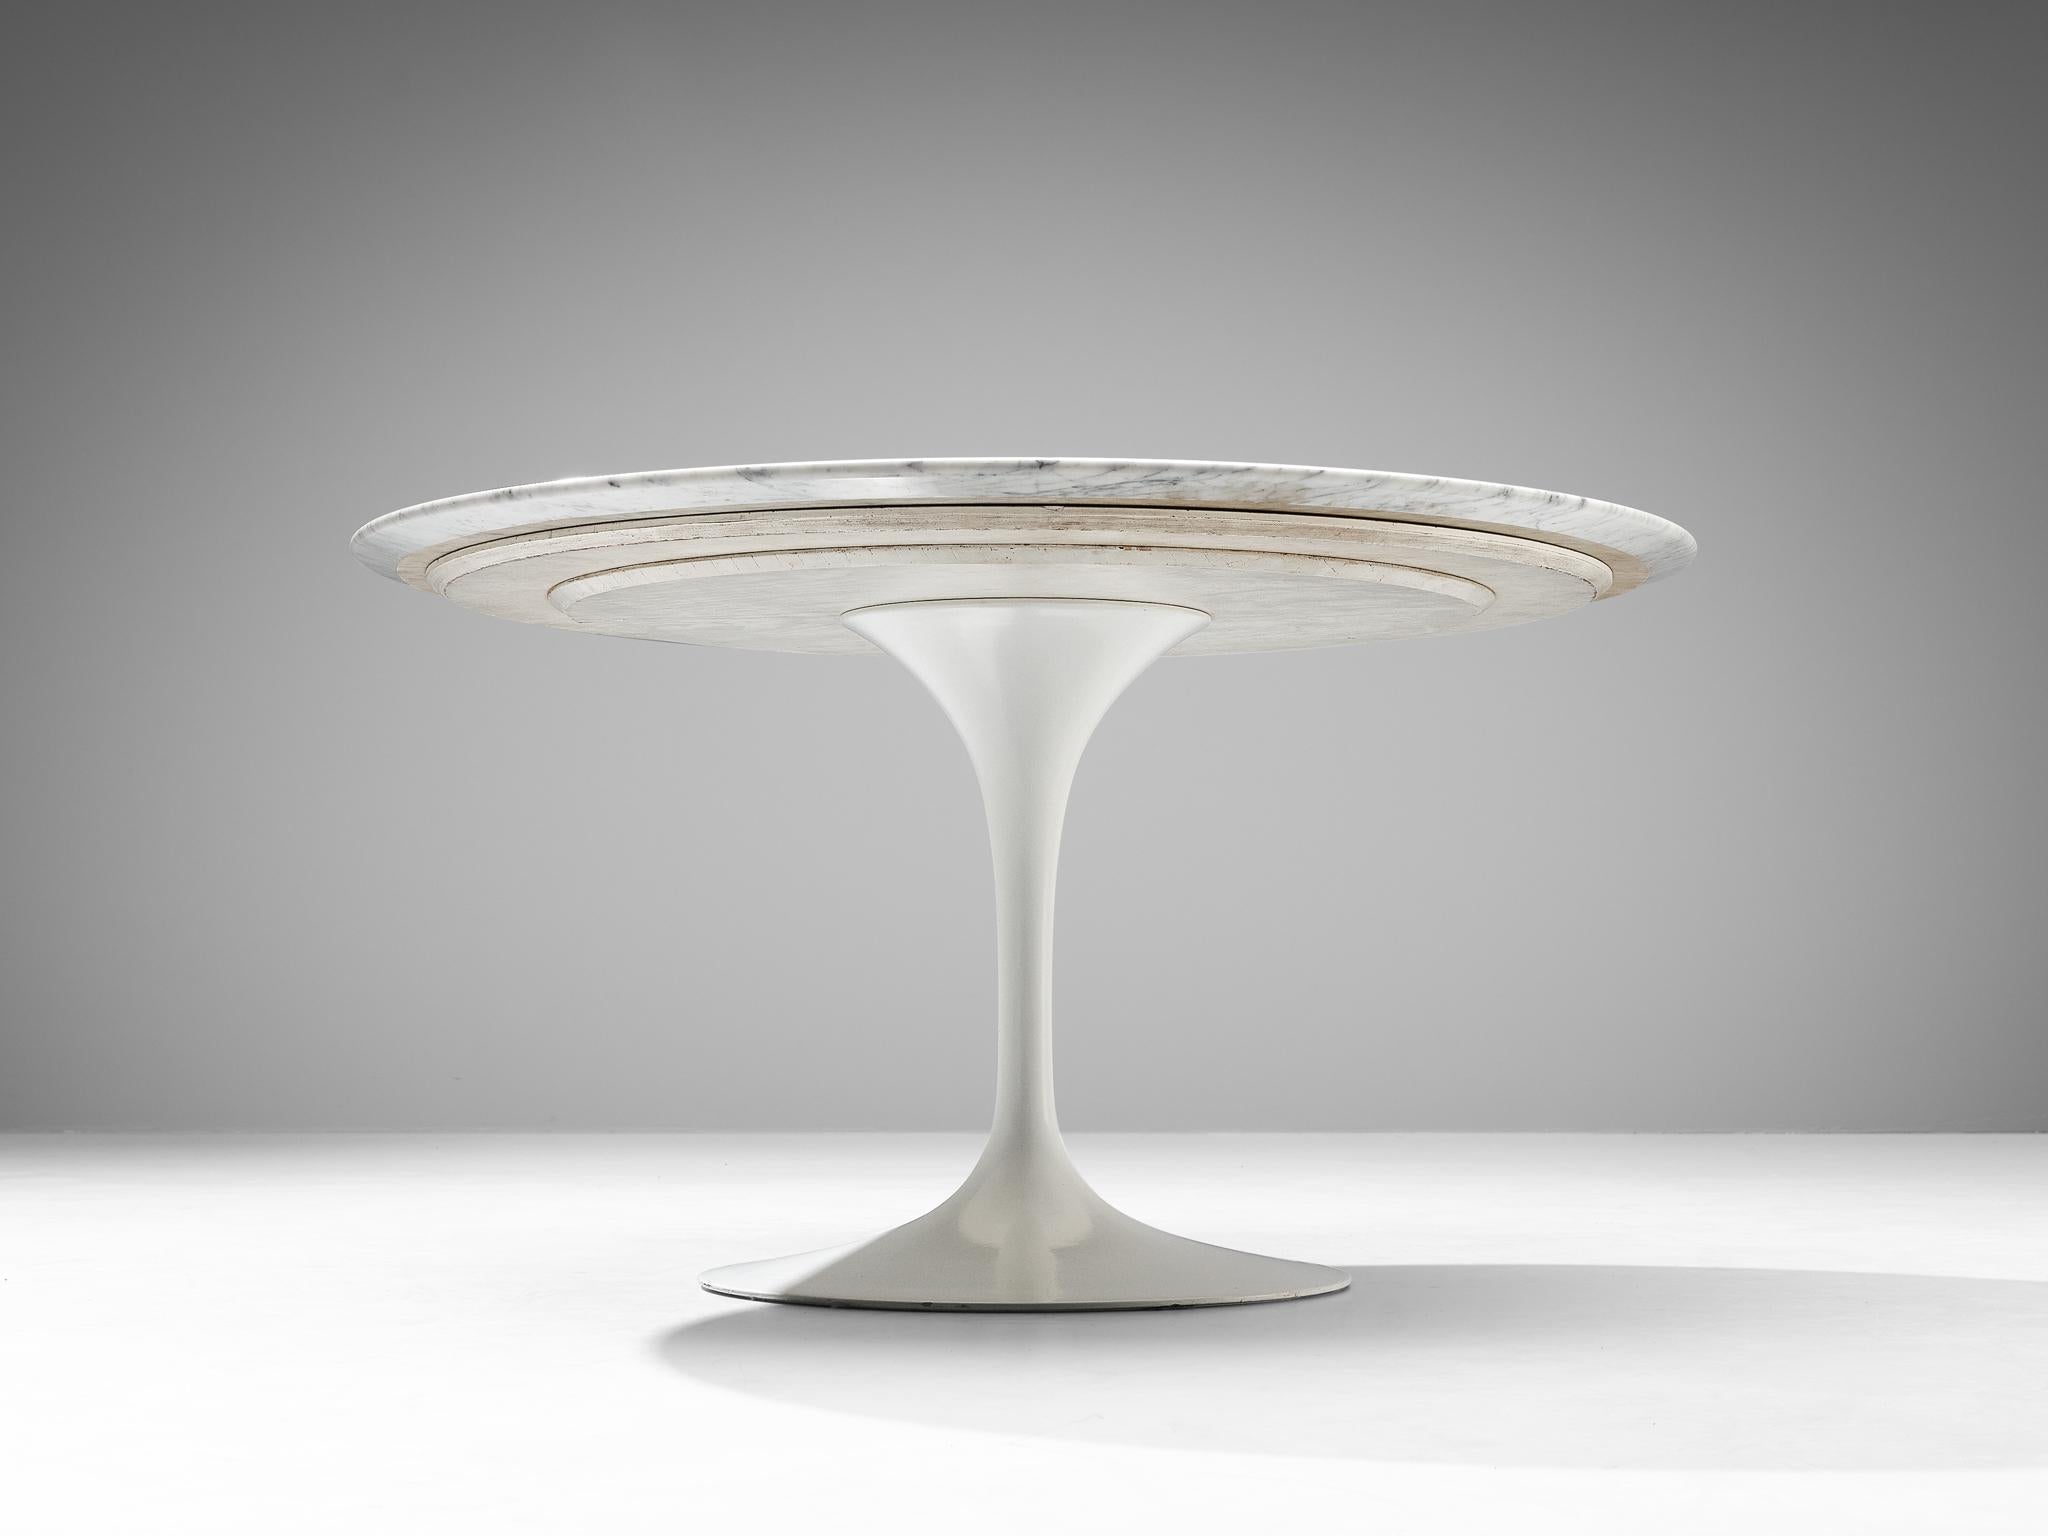 American Eero Saarinen for Knoll 'Tulip' Dining Table with Marble Top